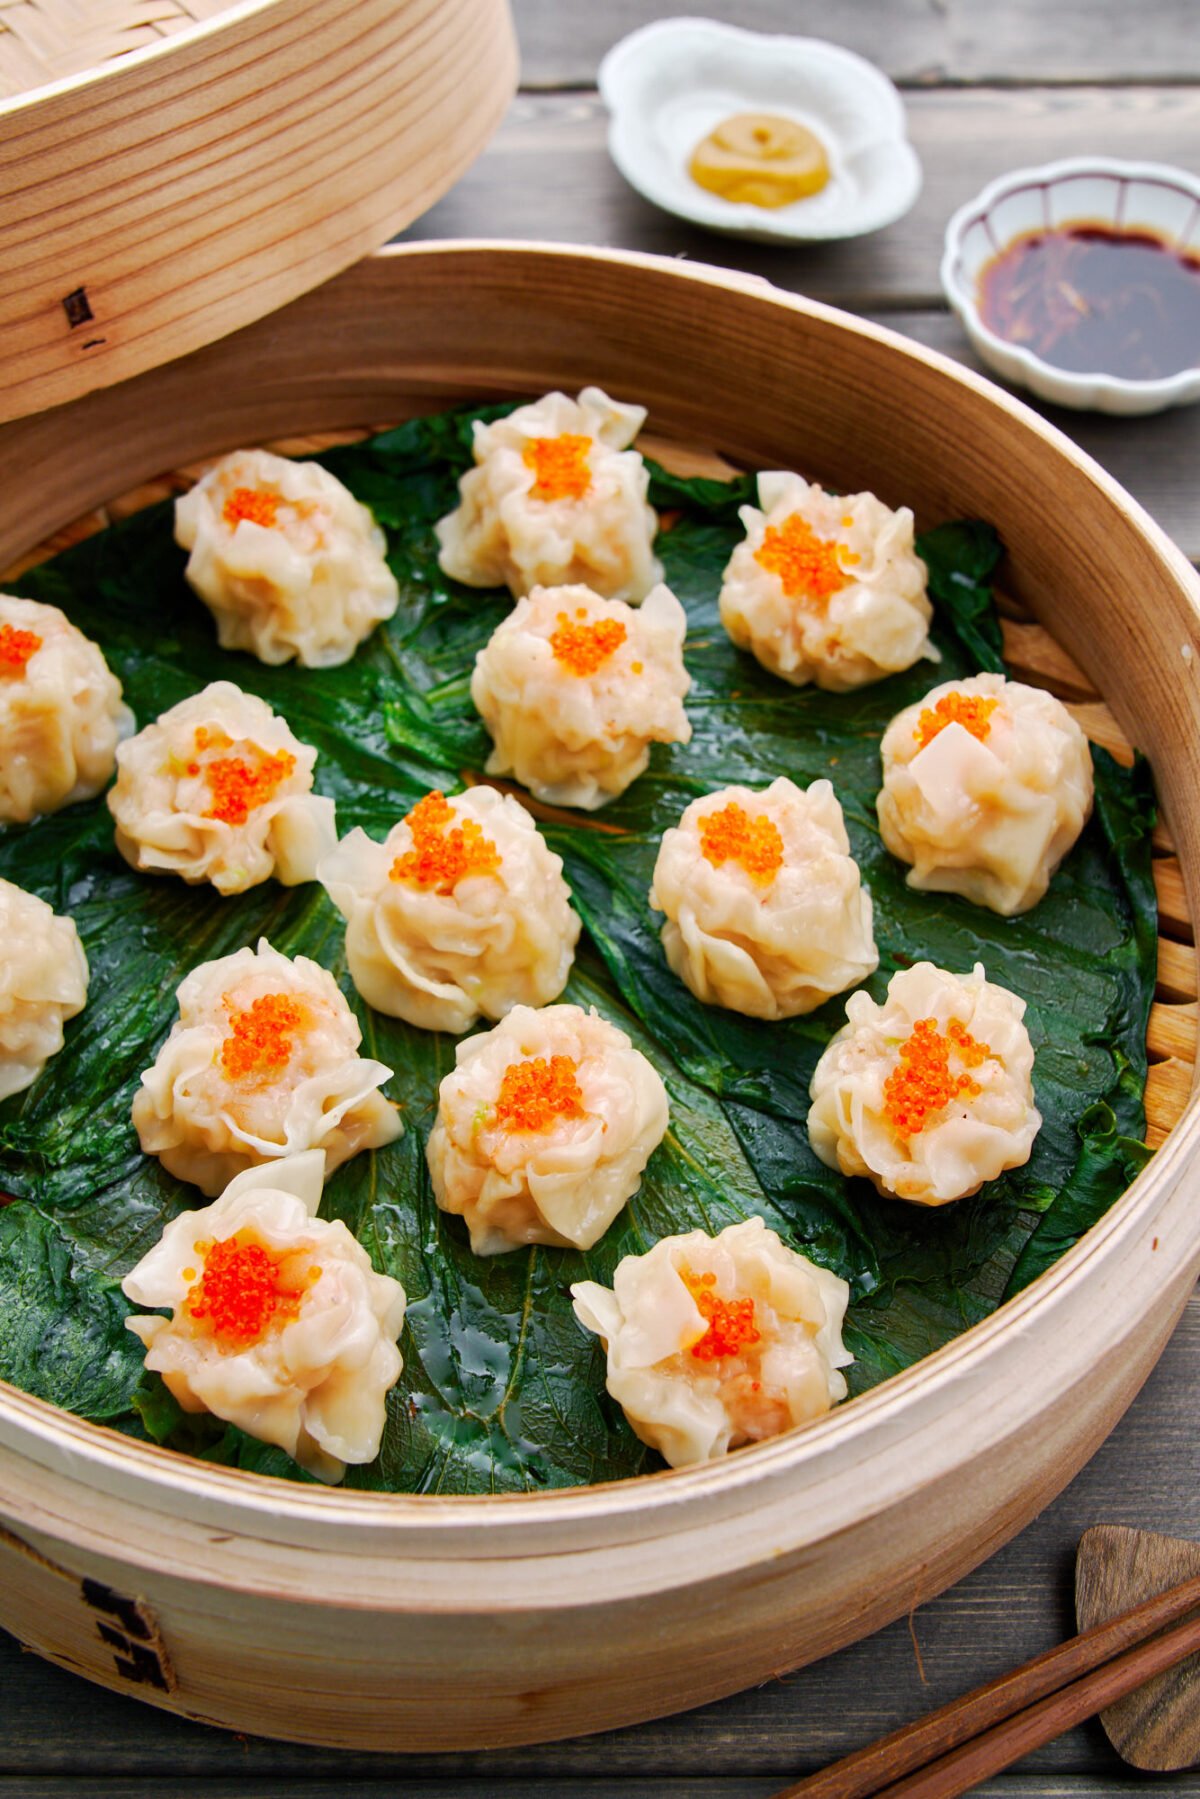 These succulent Shumai dumplings are loaded with shrimp and pork and steamed to juicy perfection.